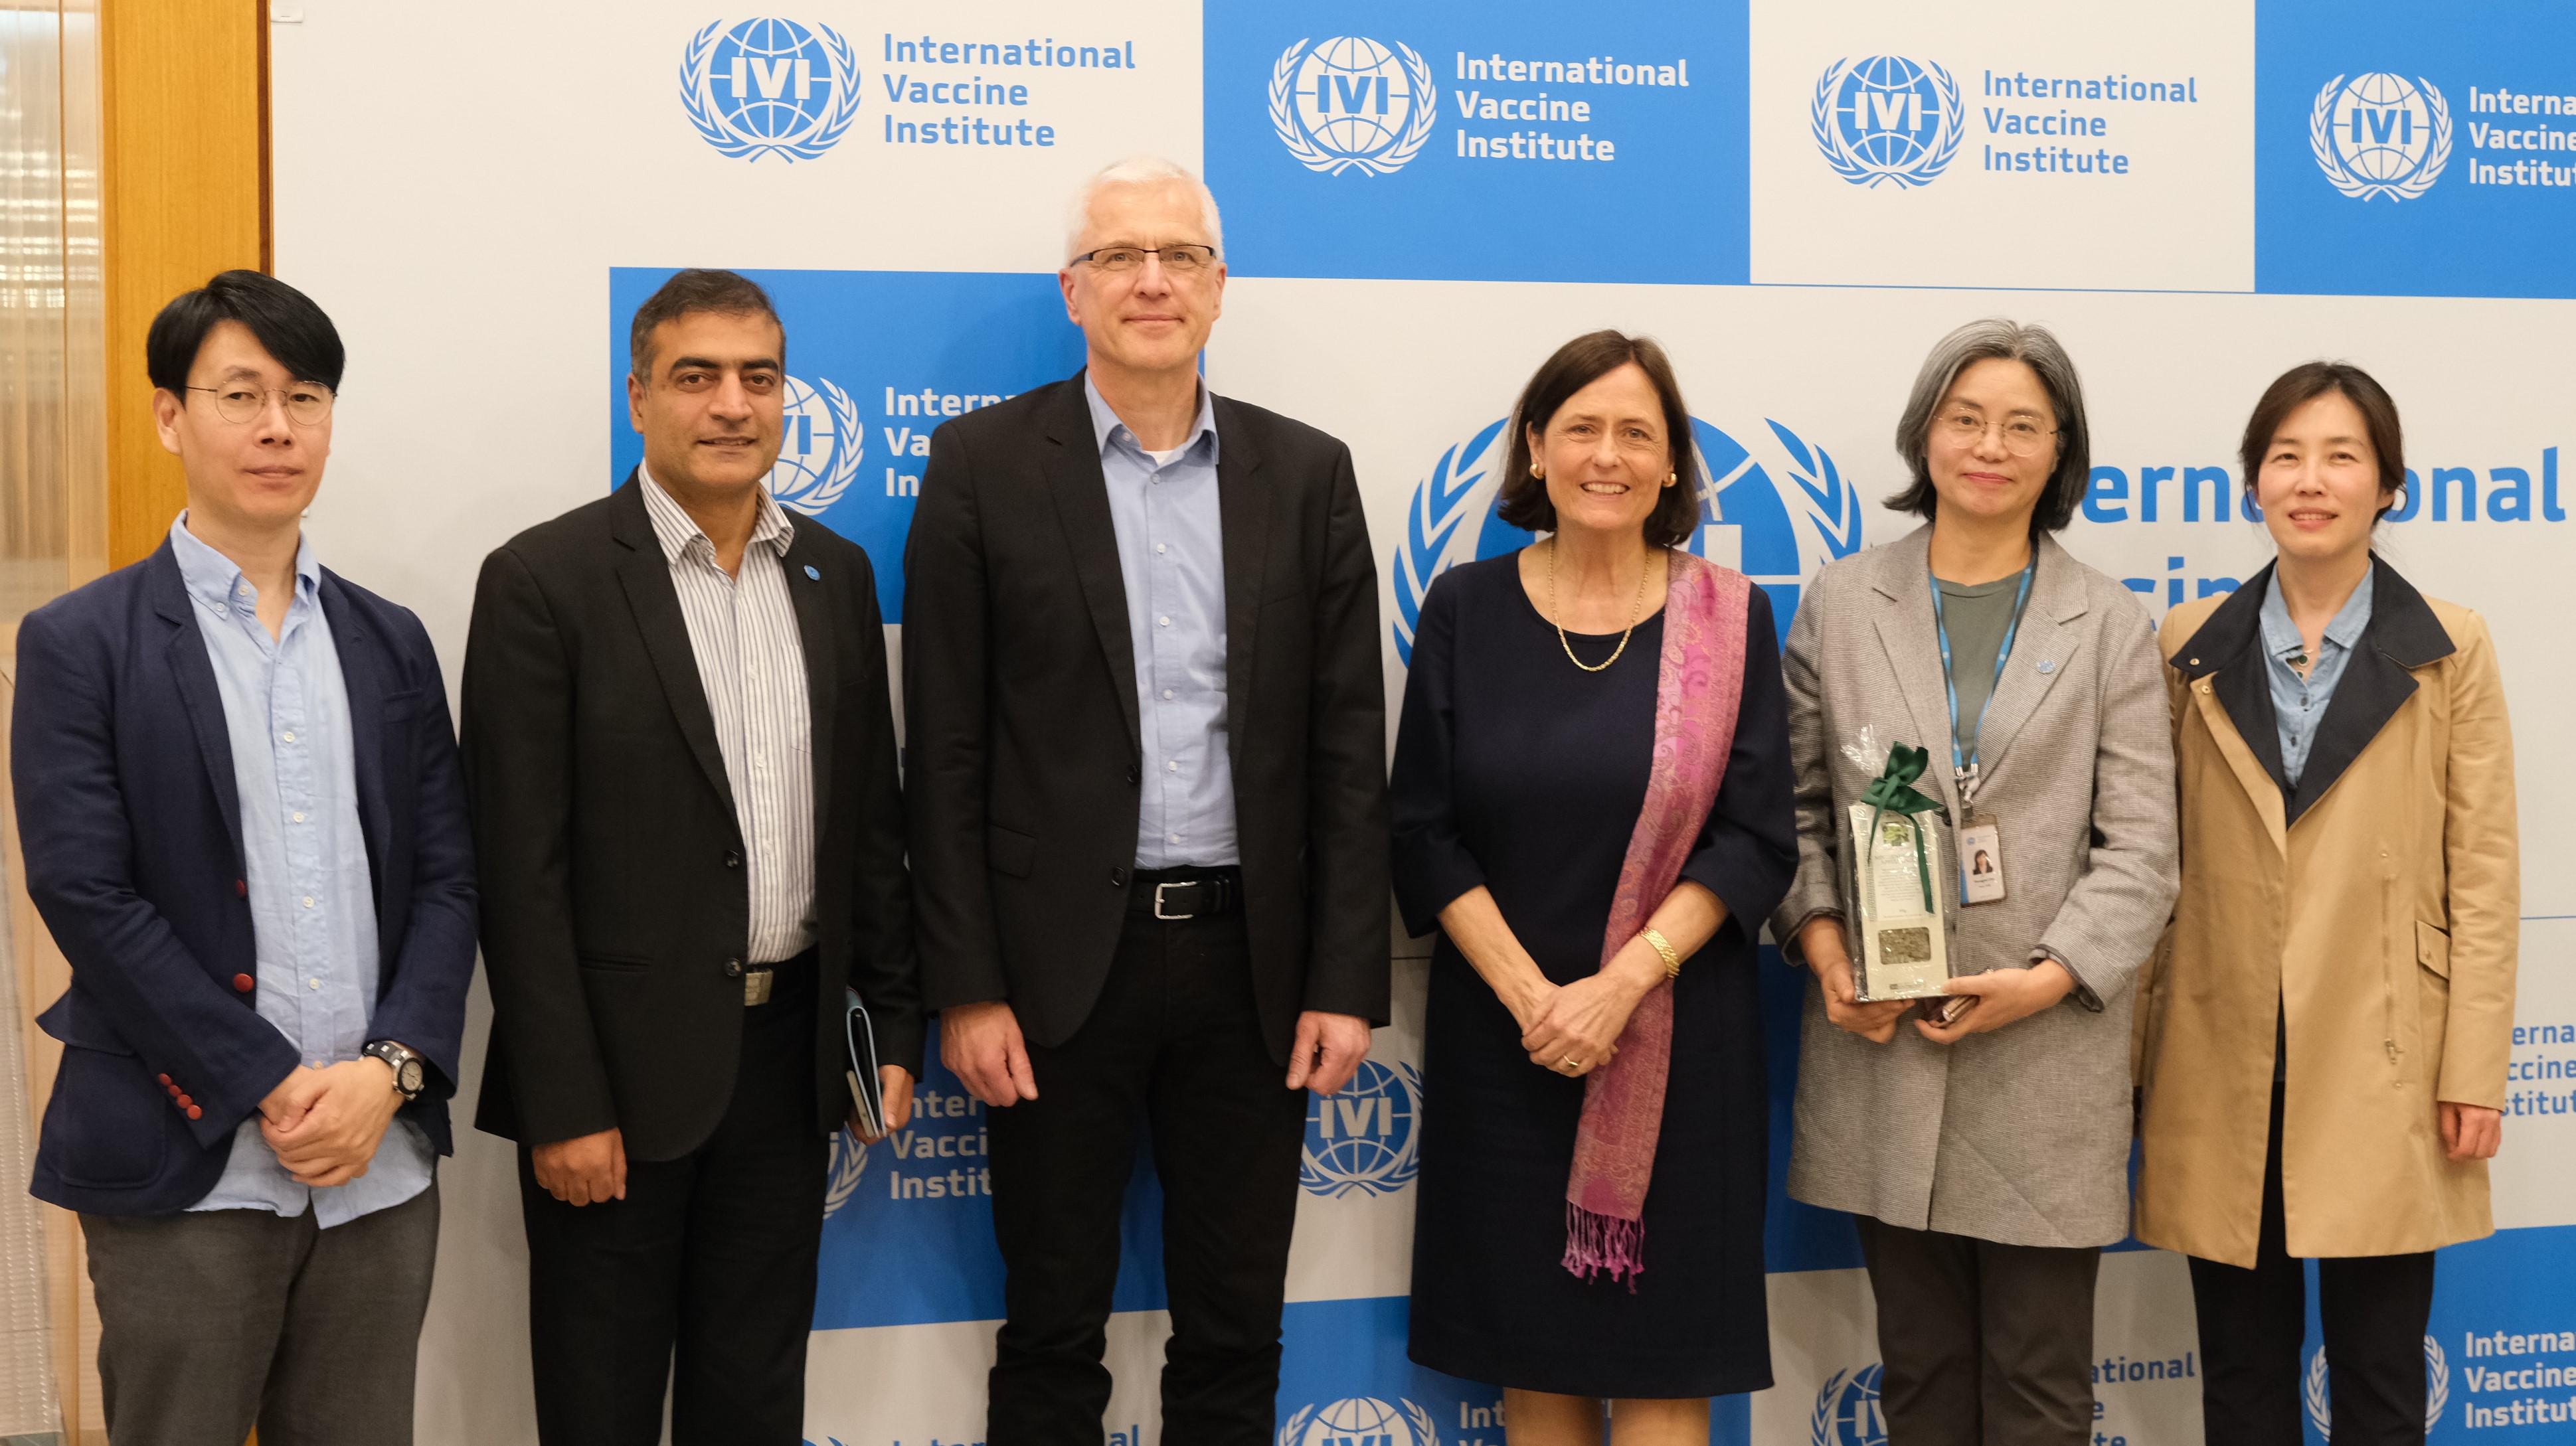 International Vaccine Institute, Seoul: Dr. Sang Hwan Seo (Senior Research Scientist & Lab Manager), Dr. Sushant Sahastrabuddhe (Acting Deputy Director General, Clinical, Assessment, Regulatory, Evaluation (CARE)), Prof. Dr. Axel Brakhage (Vice Presi